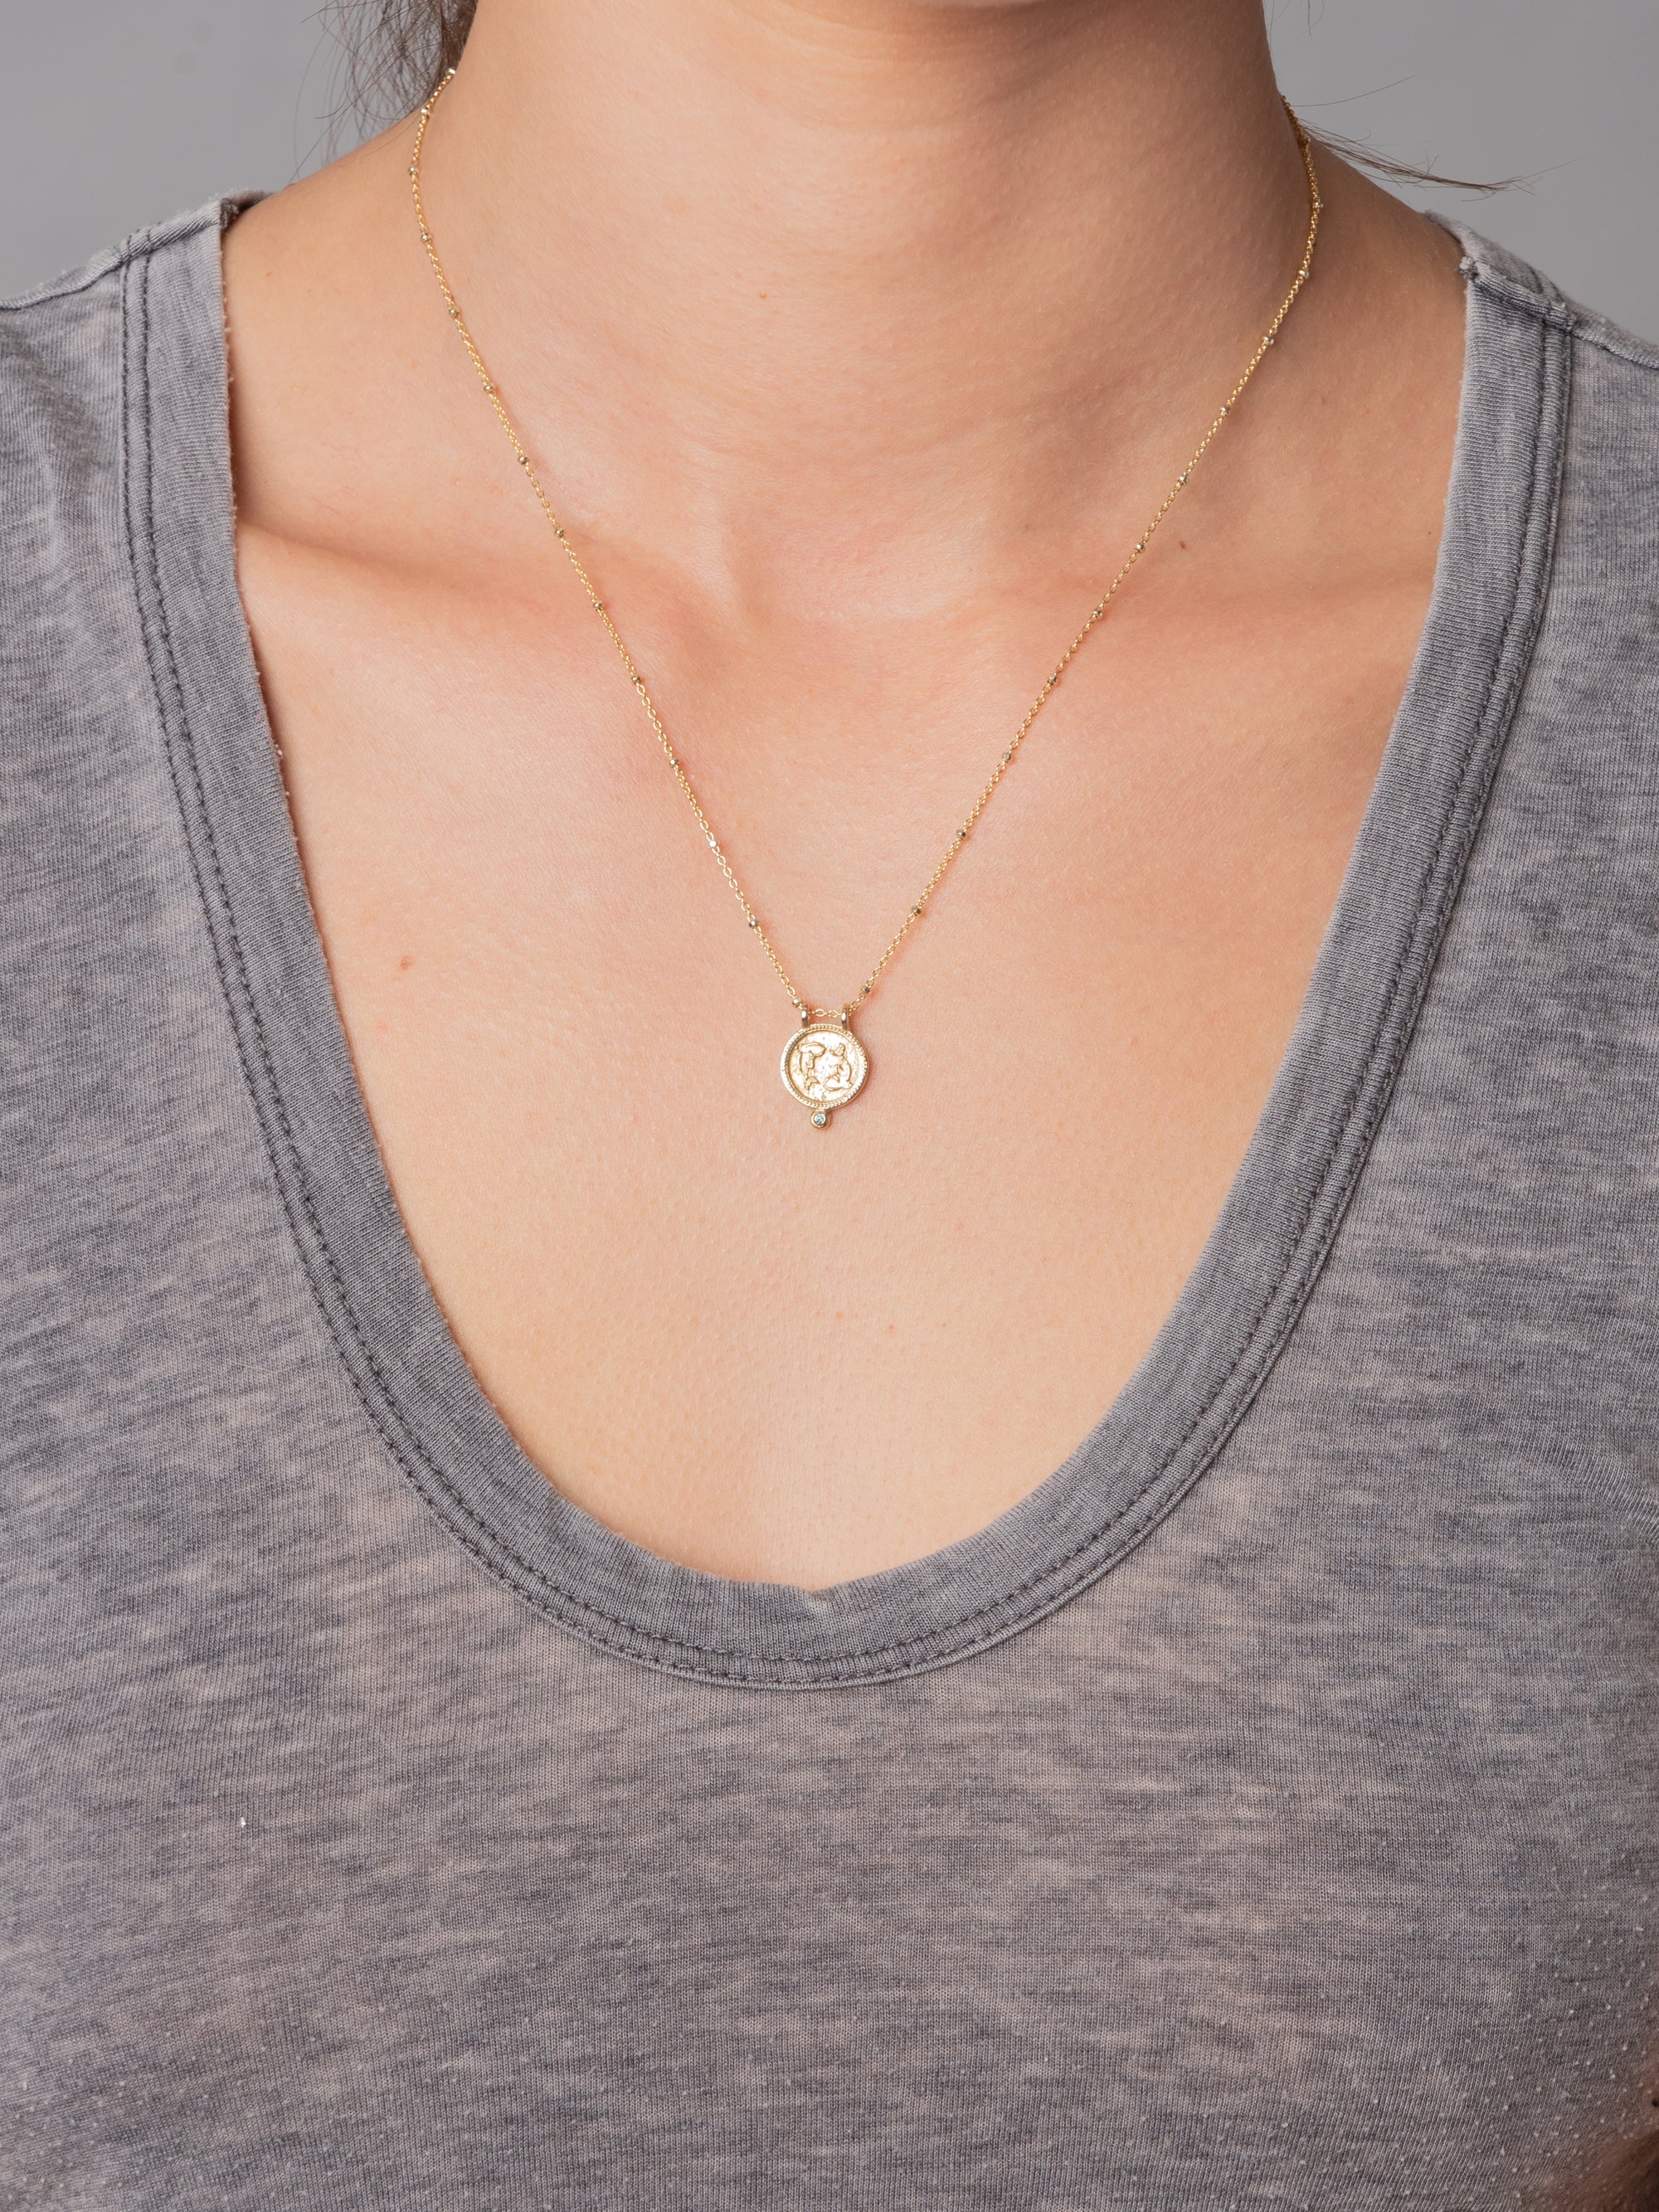 Pisces Necklace in yellow bronze with blue diamond by Lulu Designs.